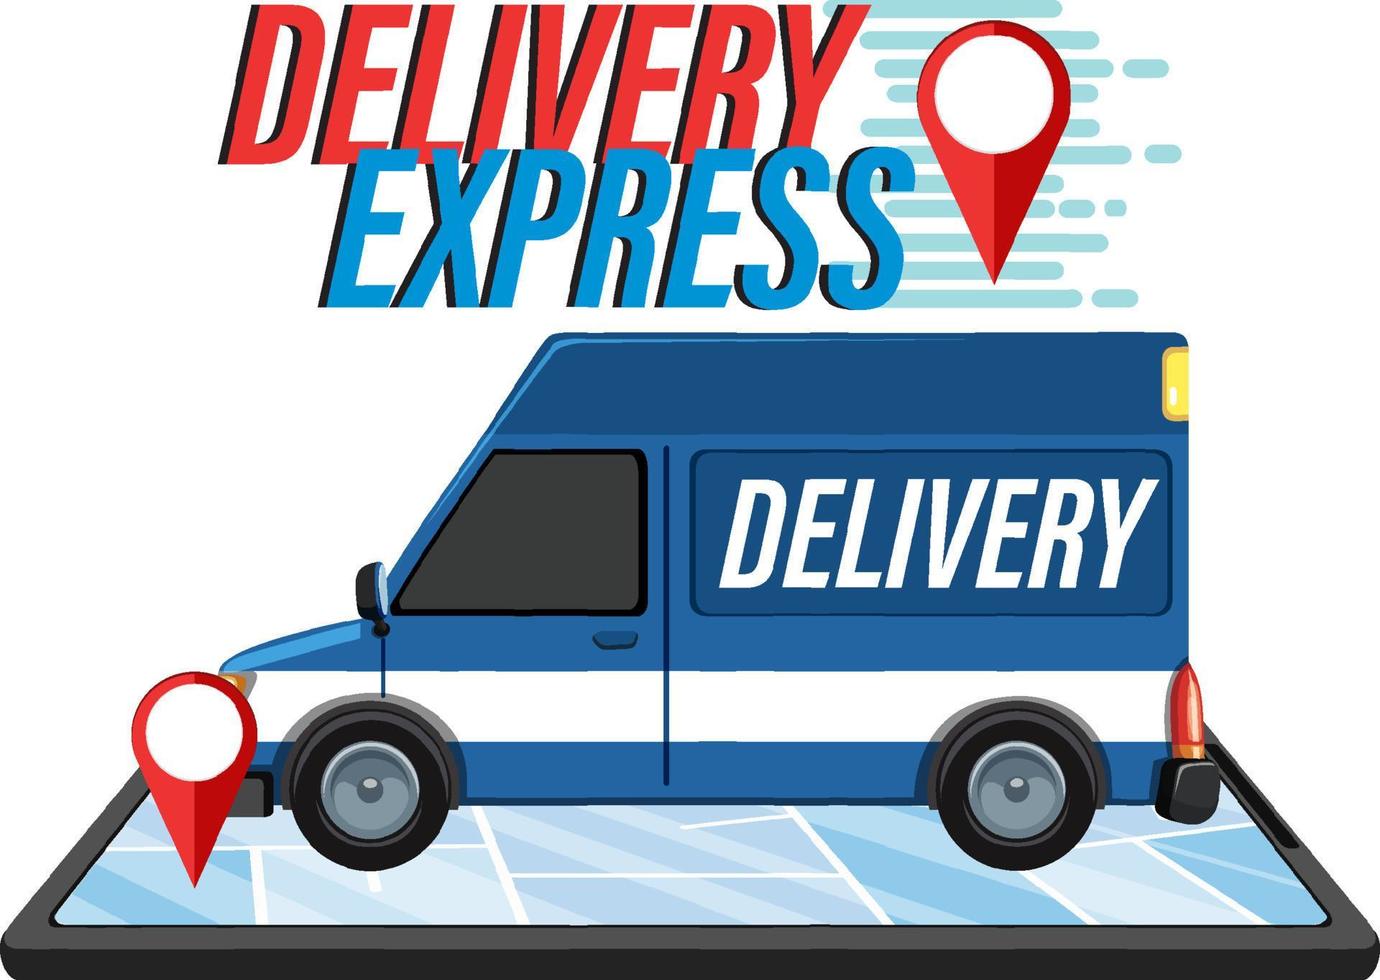 Delivery Express wordmark with panel van and location pin vector